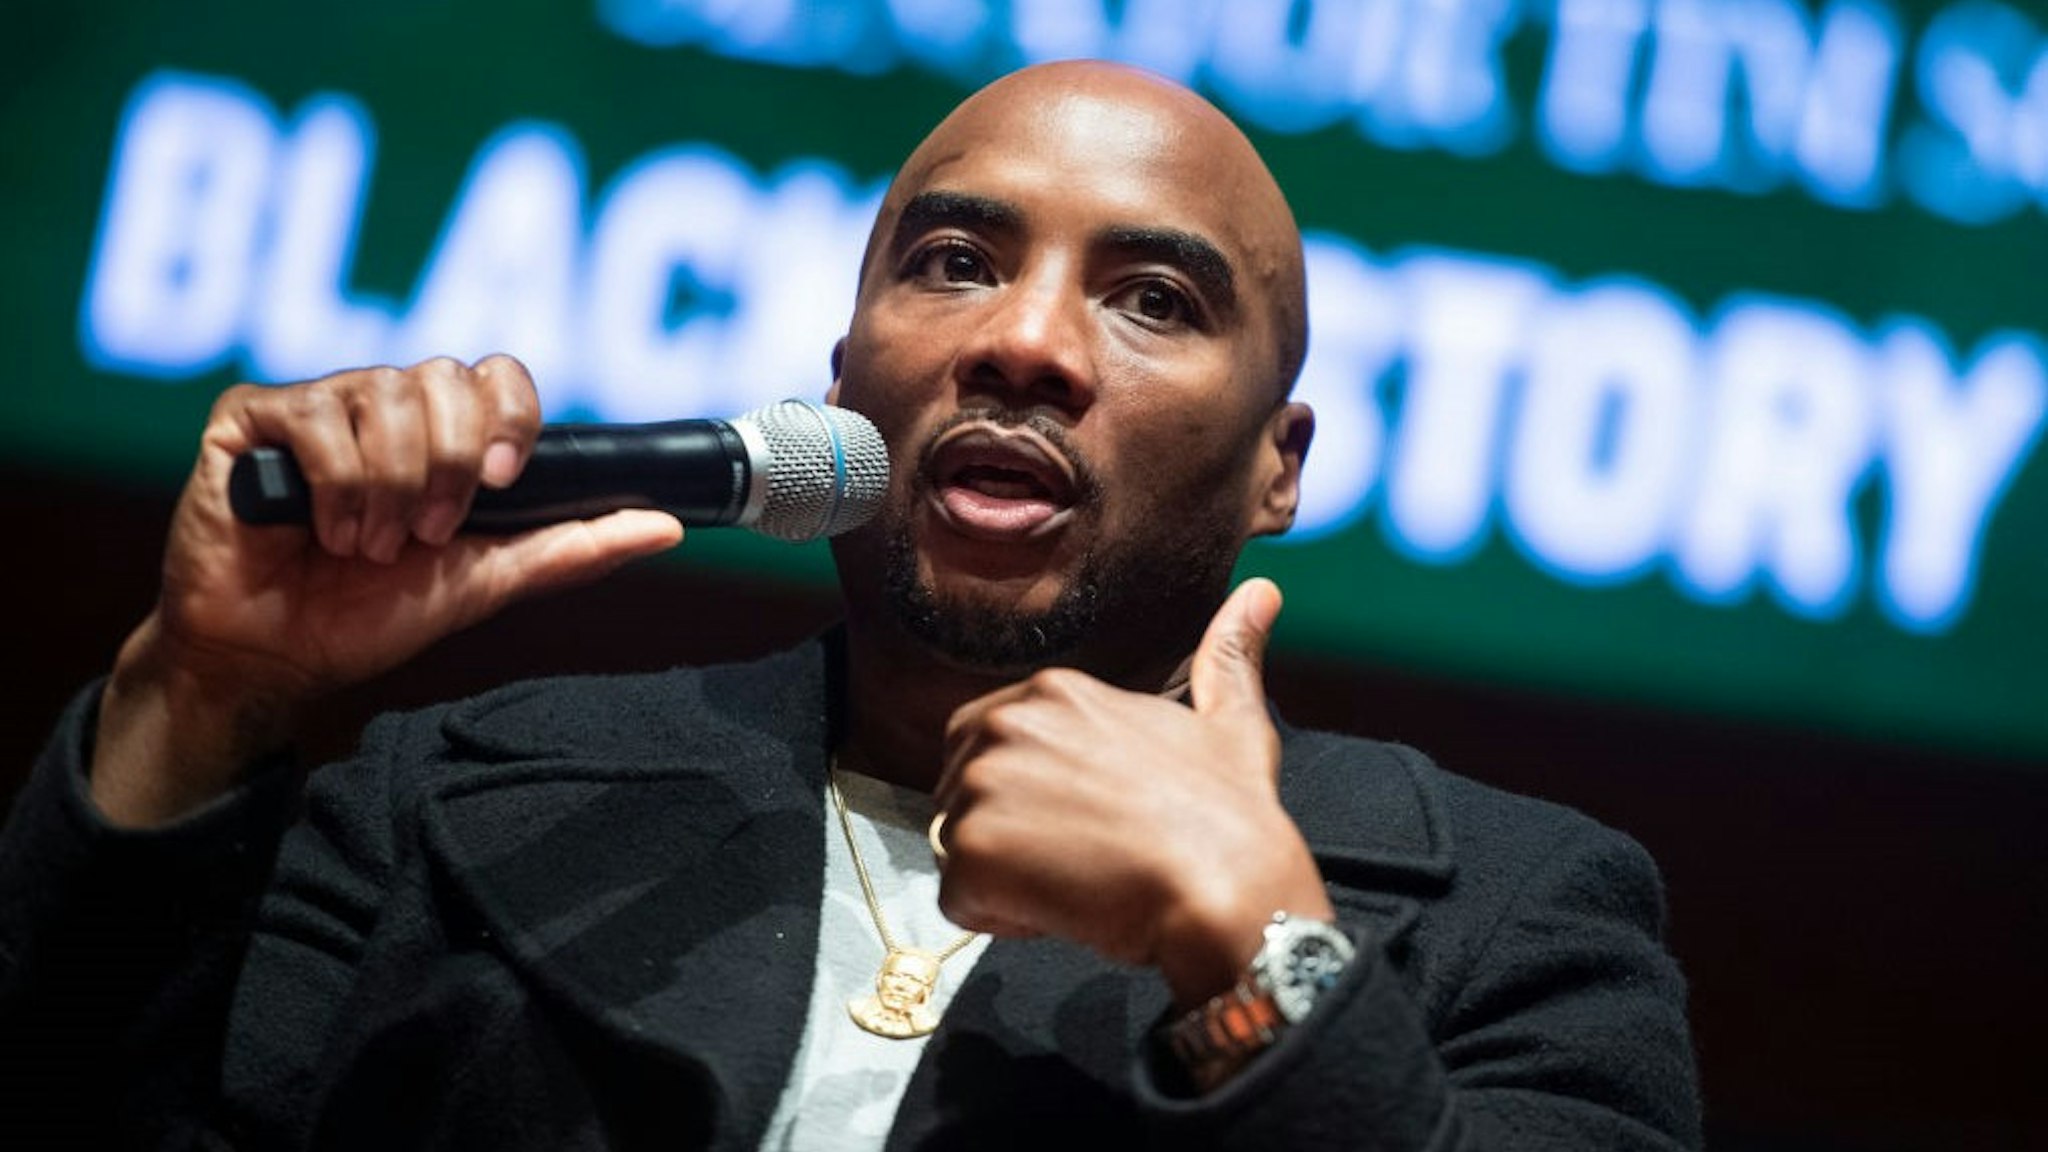 UNITED STATES - FEBRUARY 10: Charlamagne tha God, co-host of the Breakfast Club, conducts a discussion on the diversity of thought in the black community, in the Capitol Visitor Center during Black History Month on Monday, February 10, 2020. (Photo By